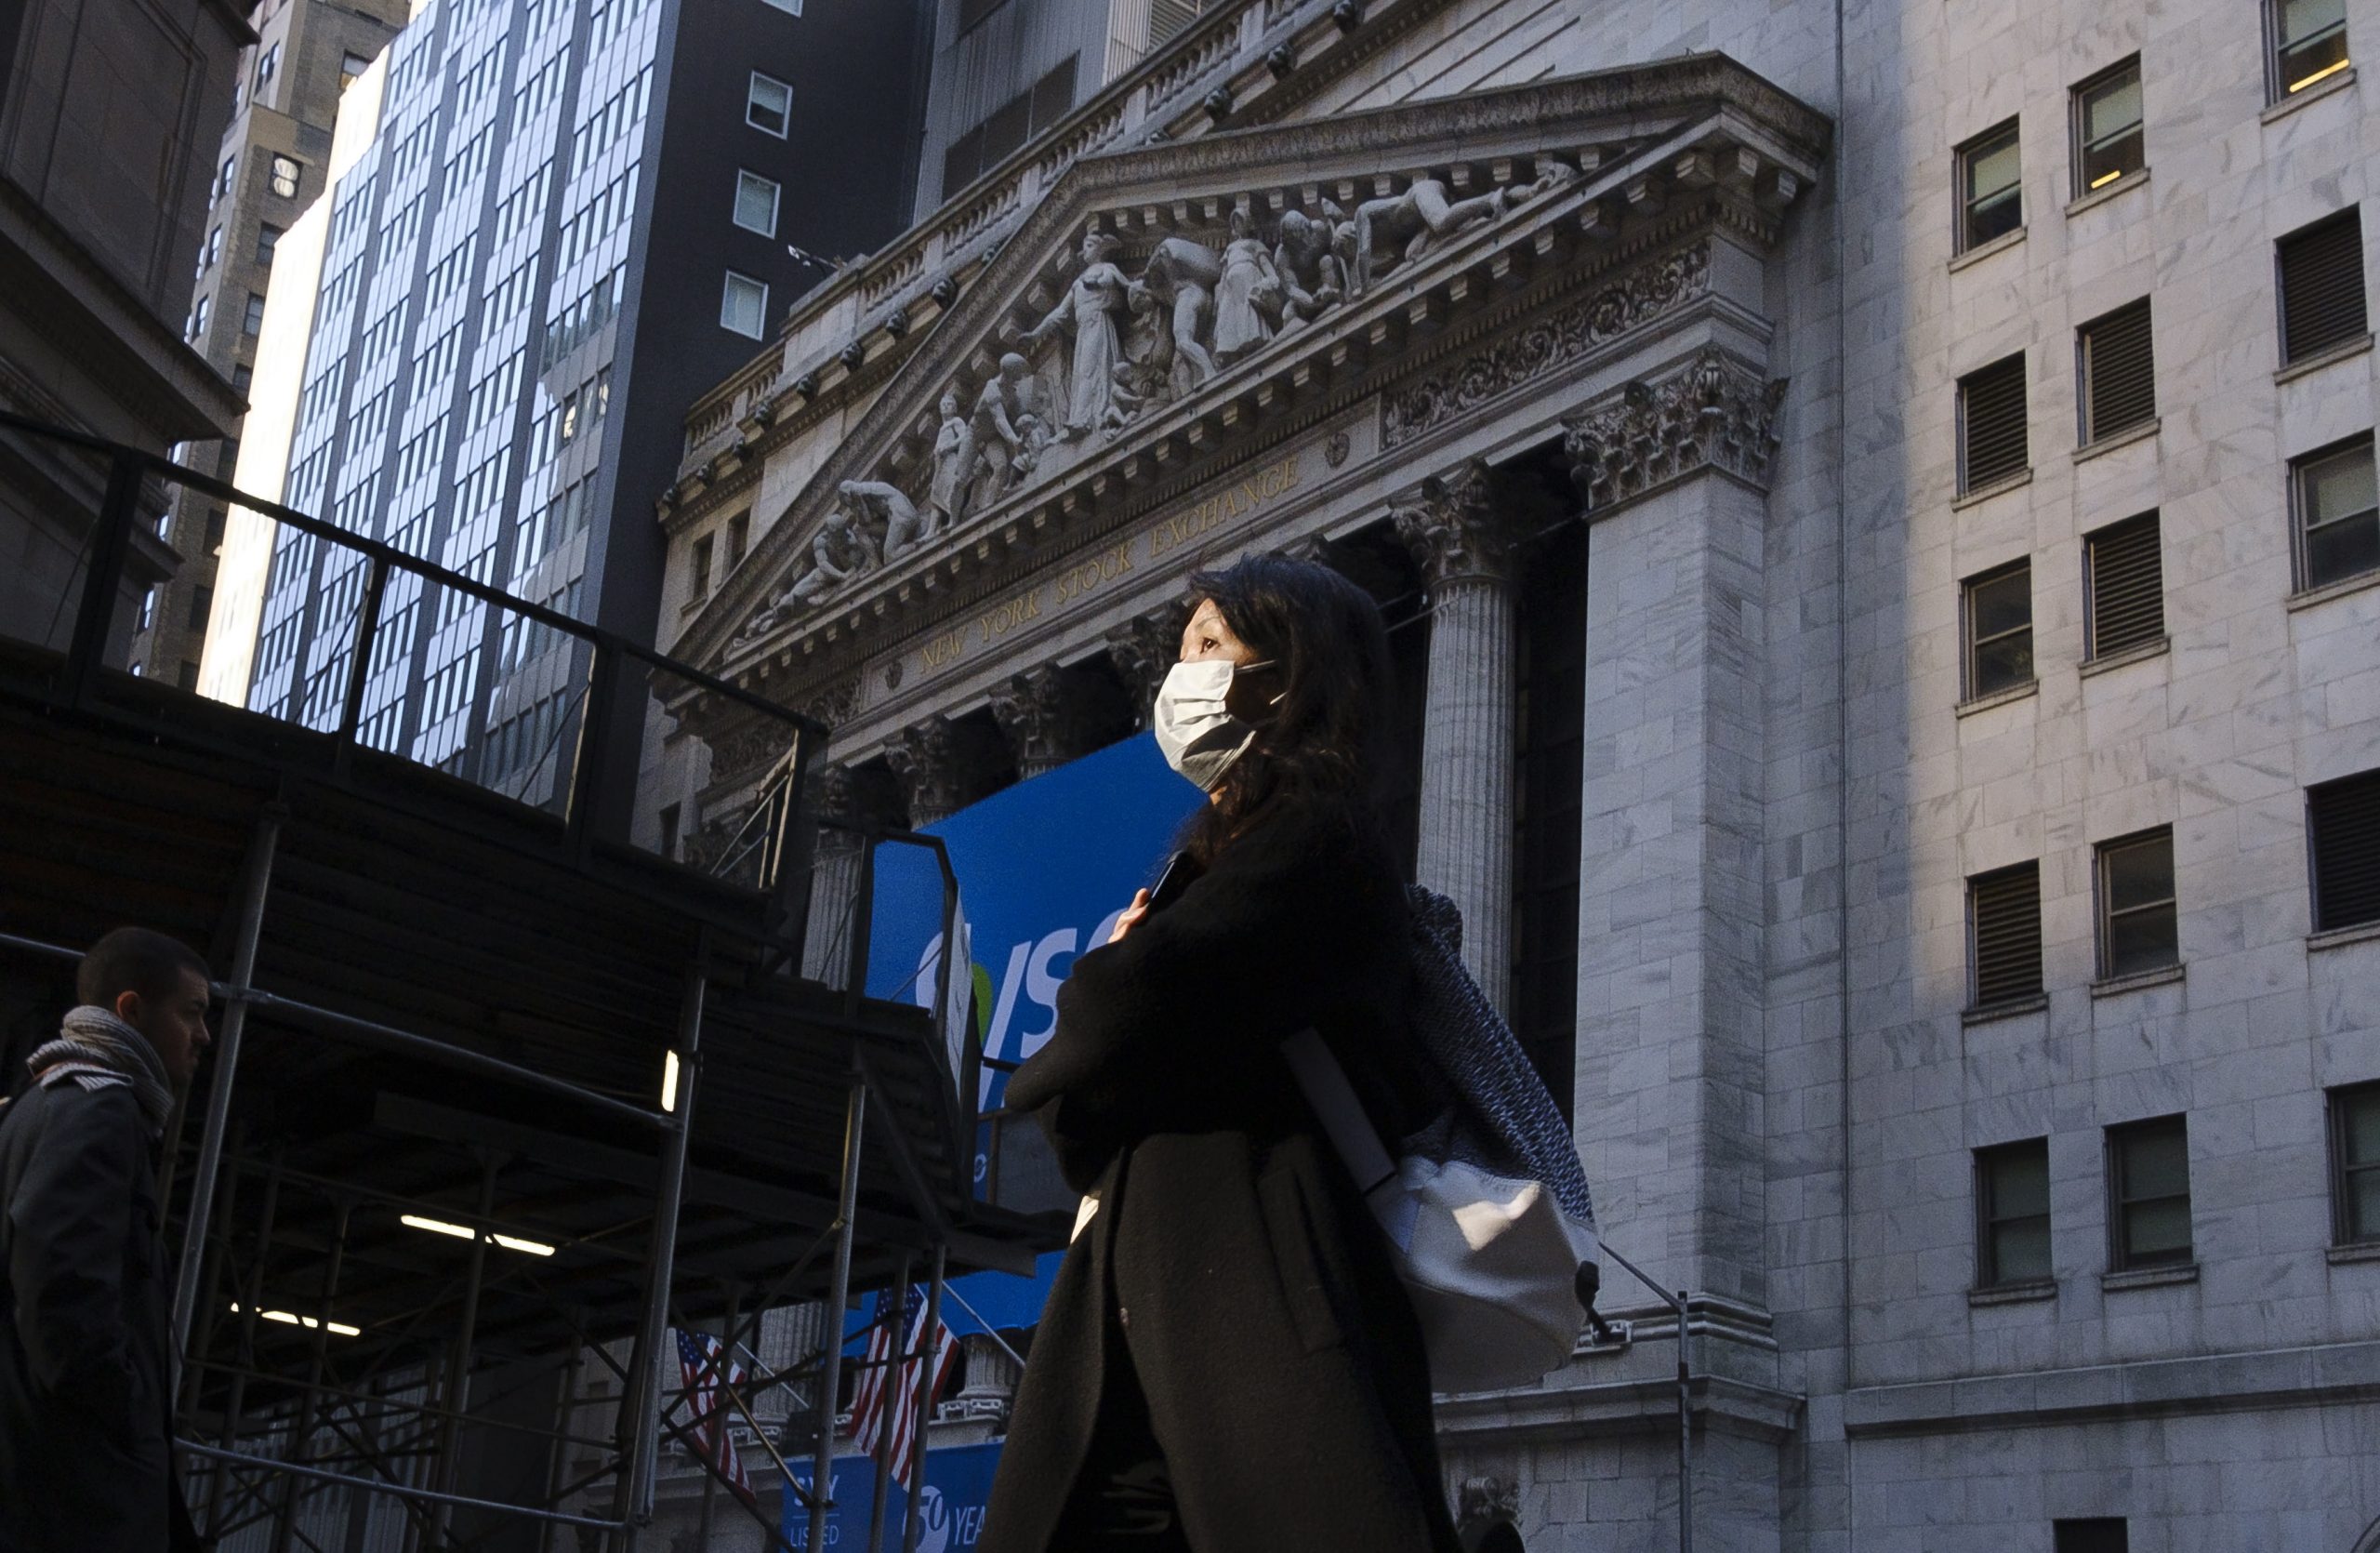 epa08267034 A person wearing a face mask walks past the New York Stock Exchange in New York, New York, USA, 03 March 2020. The previous day, officials announced the city's first known case of the coronavirus in a patient who is a healthcare worker who had recently travelled to Iran, as world financial markets are continuing to react to the spread of the virus.  EPA/JUSTIN LANE